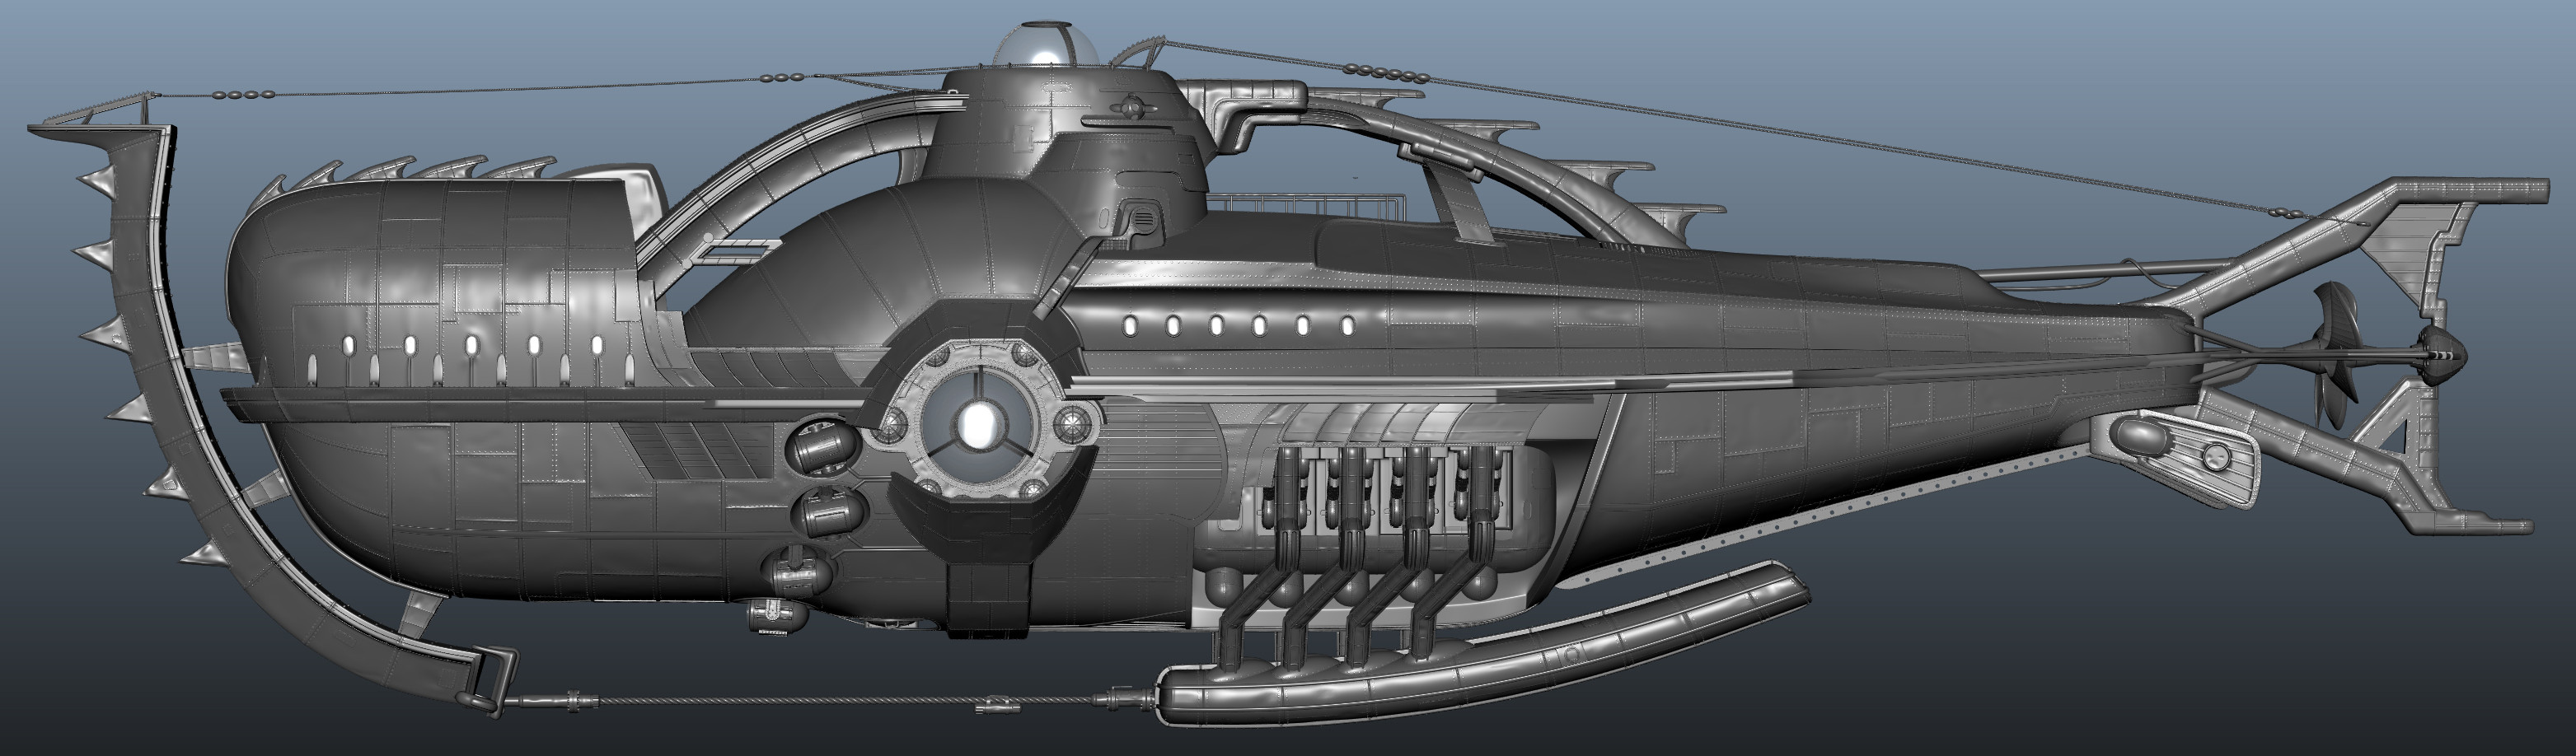 maya screen grab of the Sub I modeled. It was modeled old school all in maya no displacements. resolution was needed to sculpt the panels. There are 60000+ rivets. Model is also water tight for water sims.